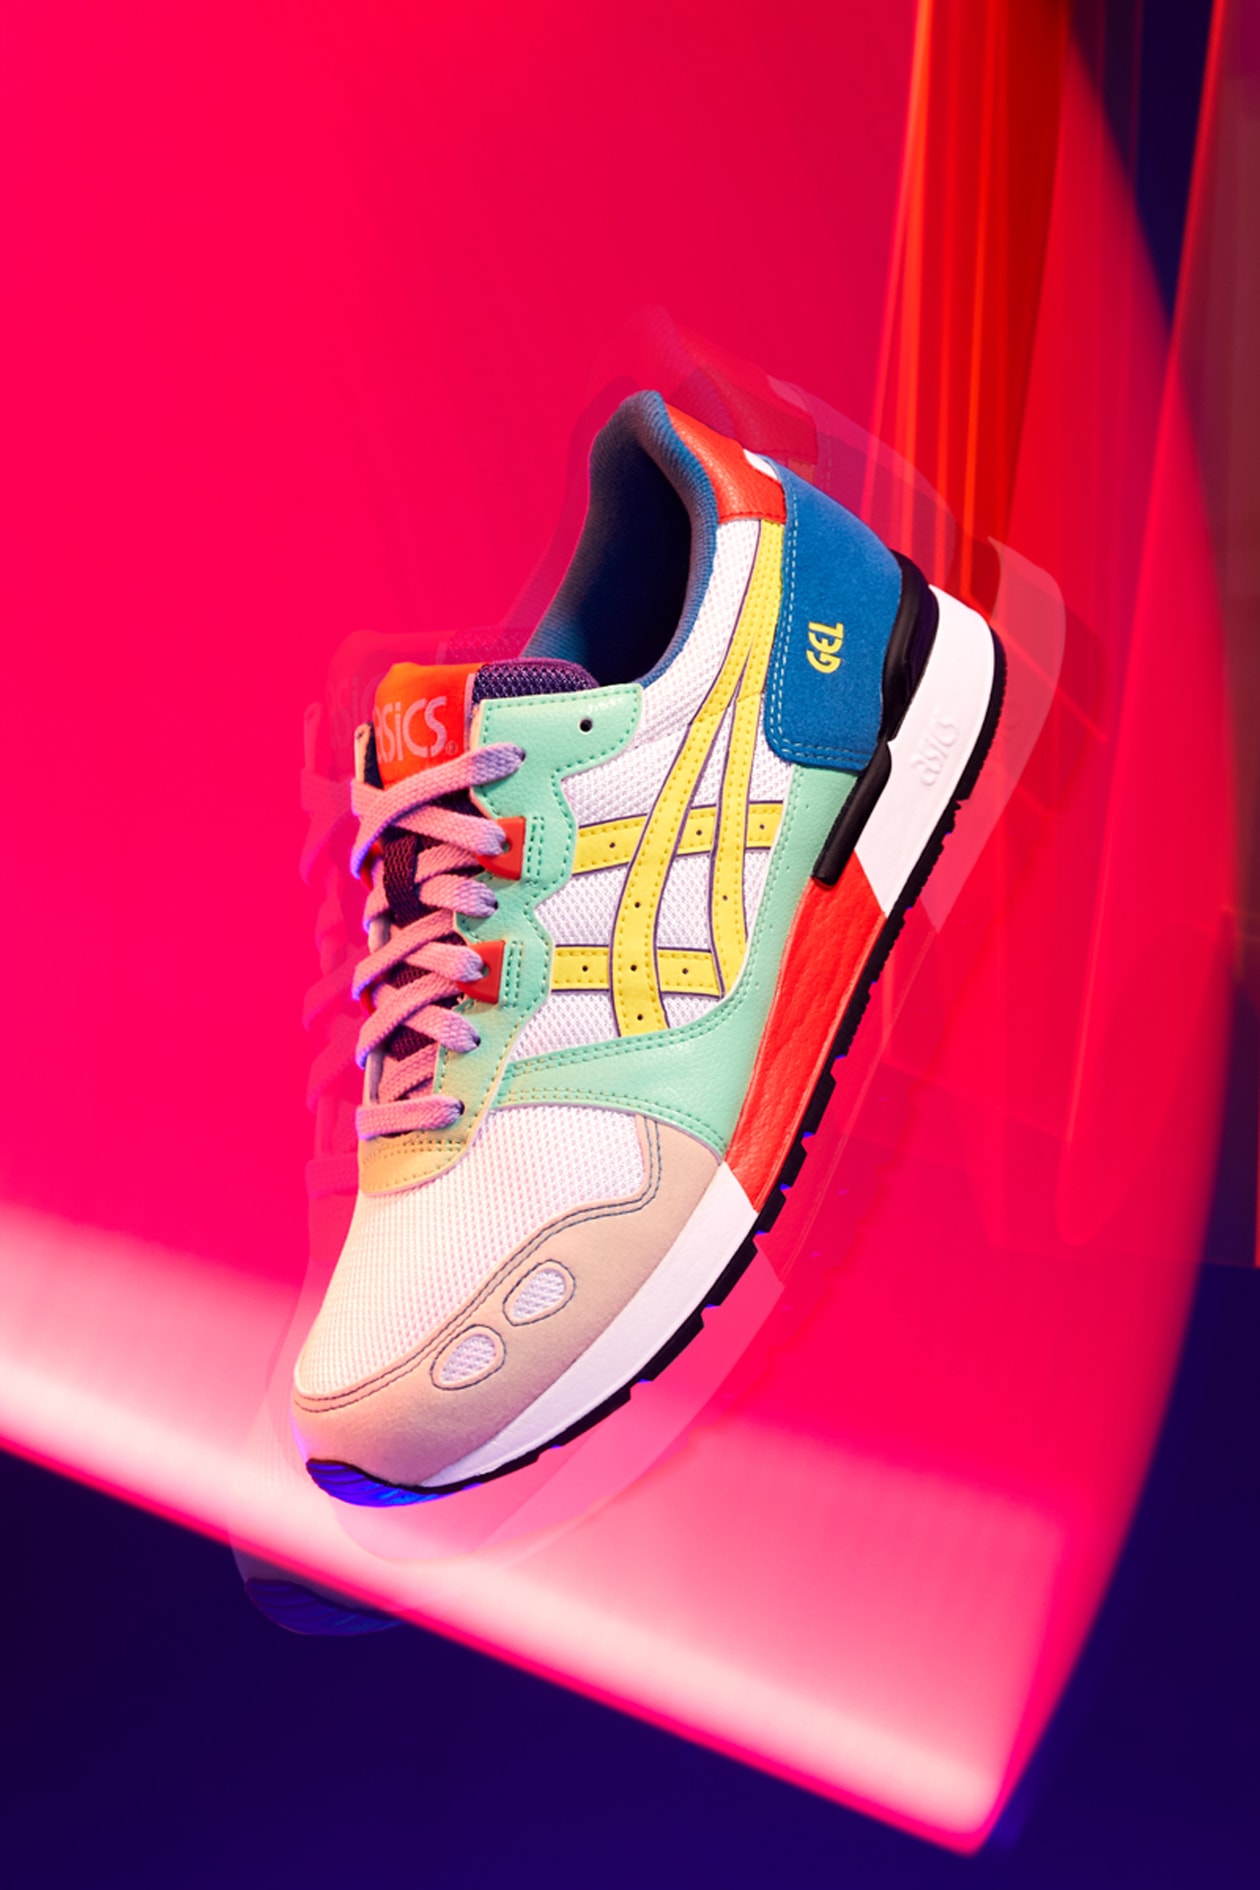 GEL-LYTE III, GEL-LYTE, LYTE-CLASSIC, TARTHER BLAST silhouettes performance runners color palette heritage many colorways styles 